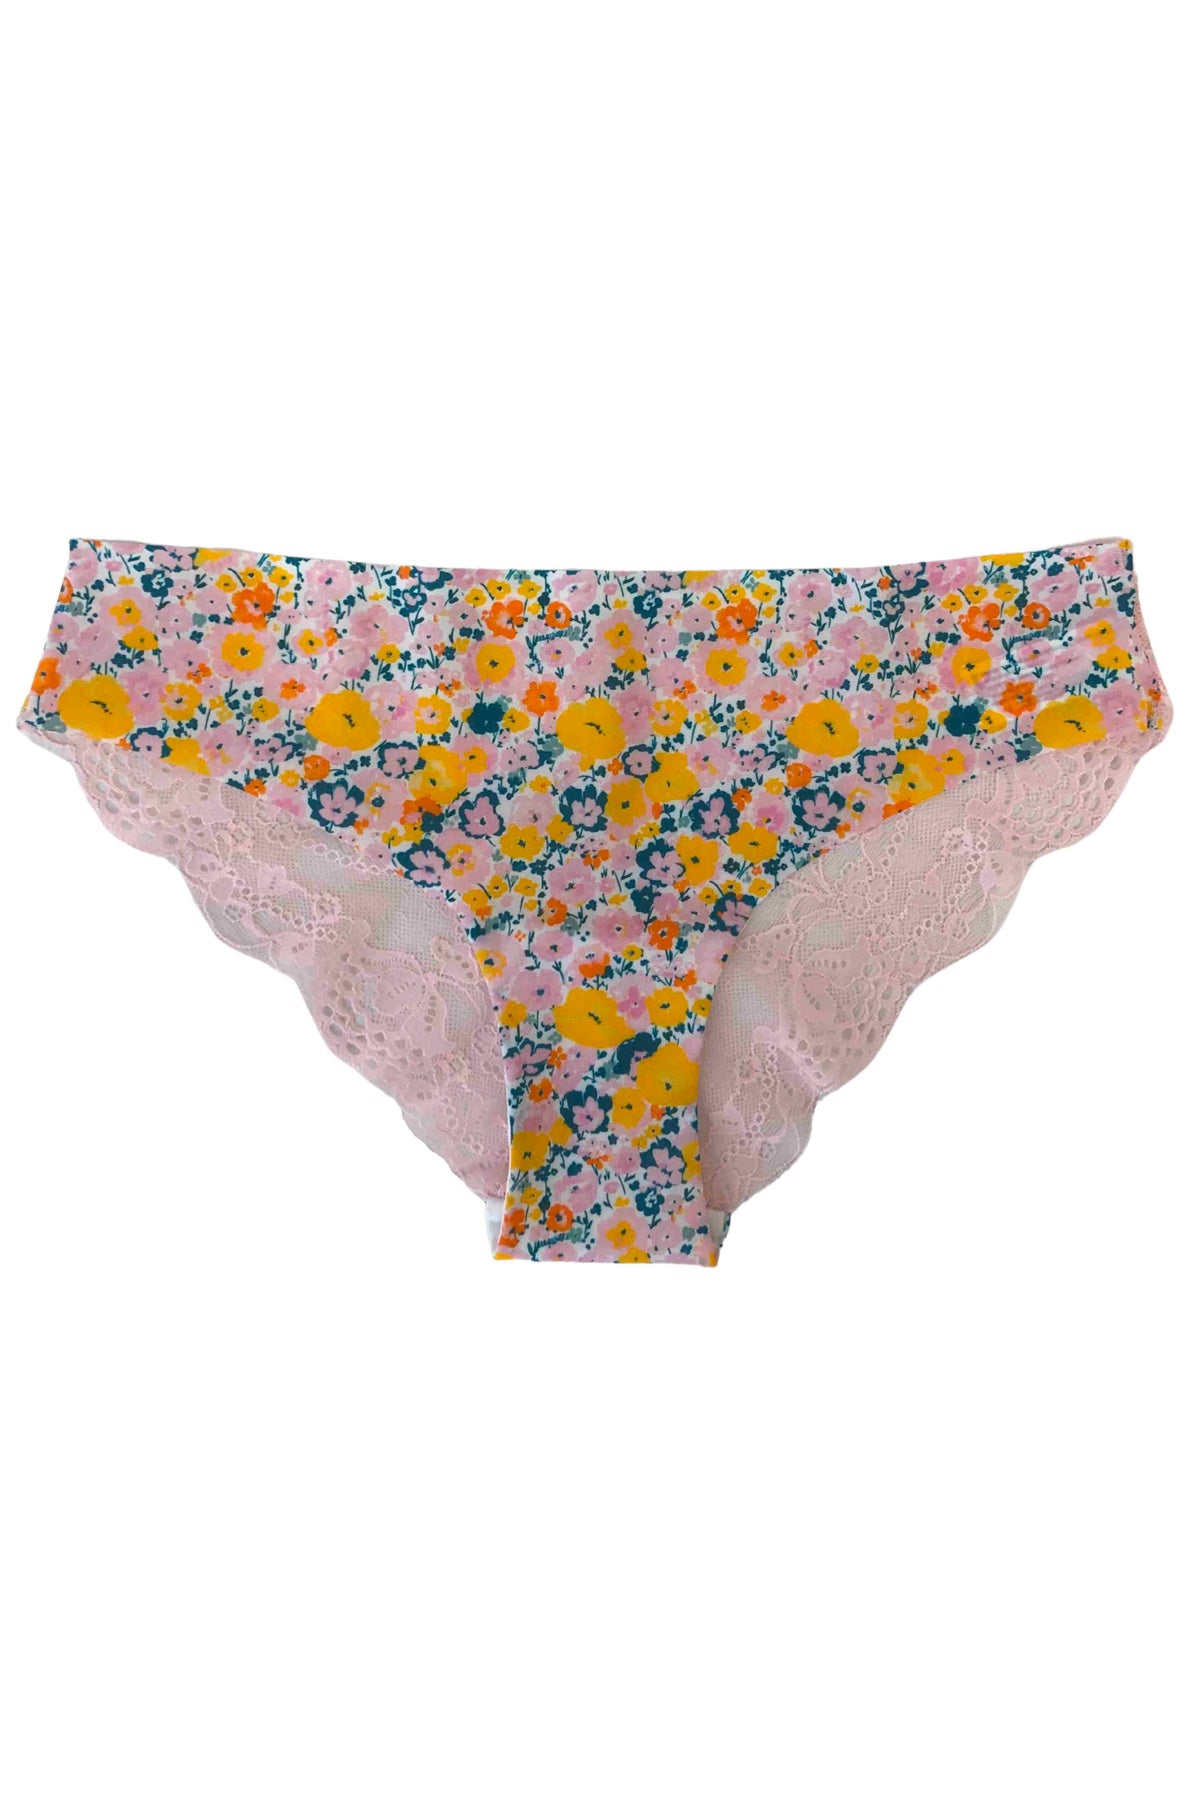 Bouton d'or printed panty with lace